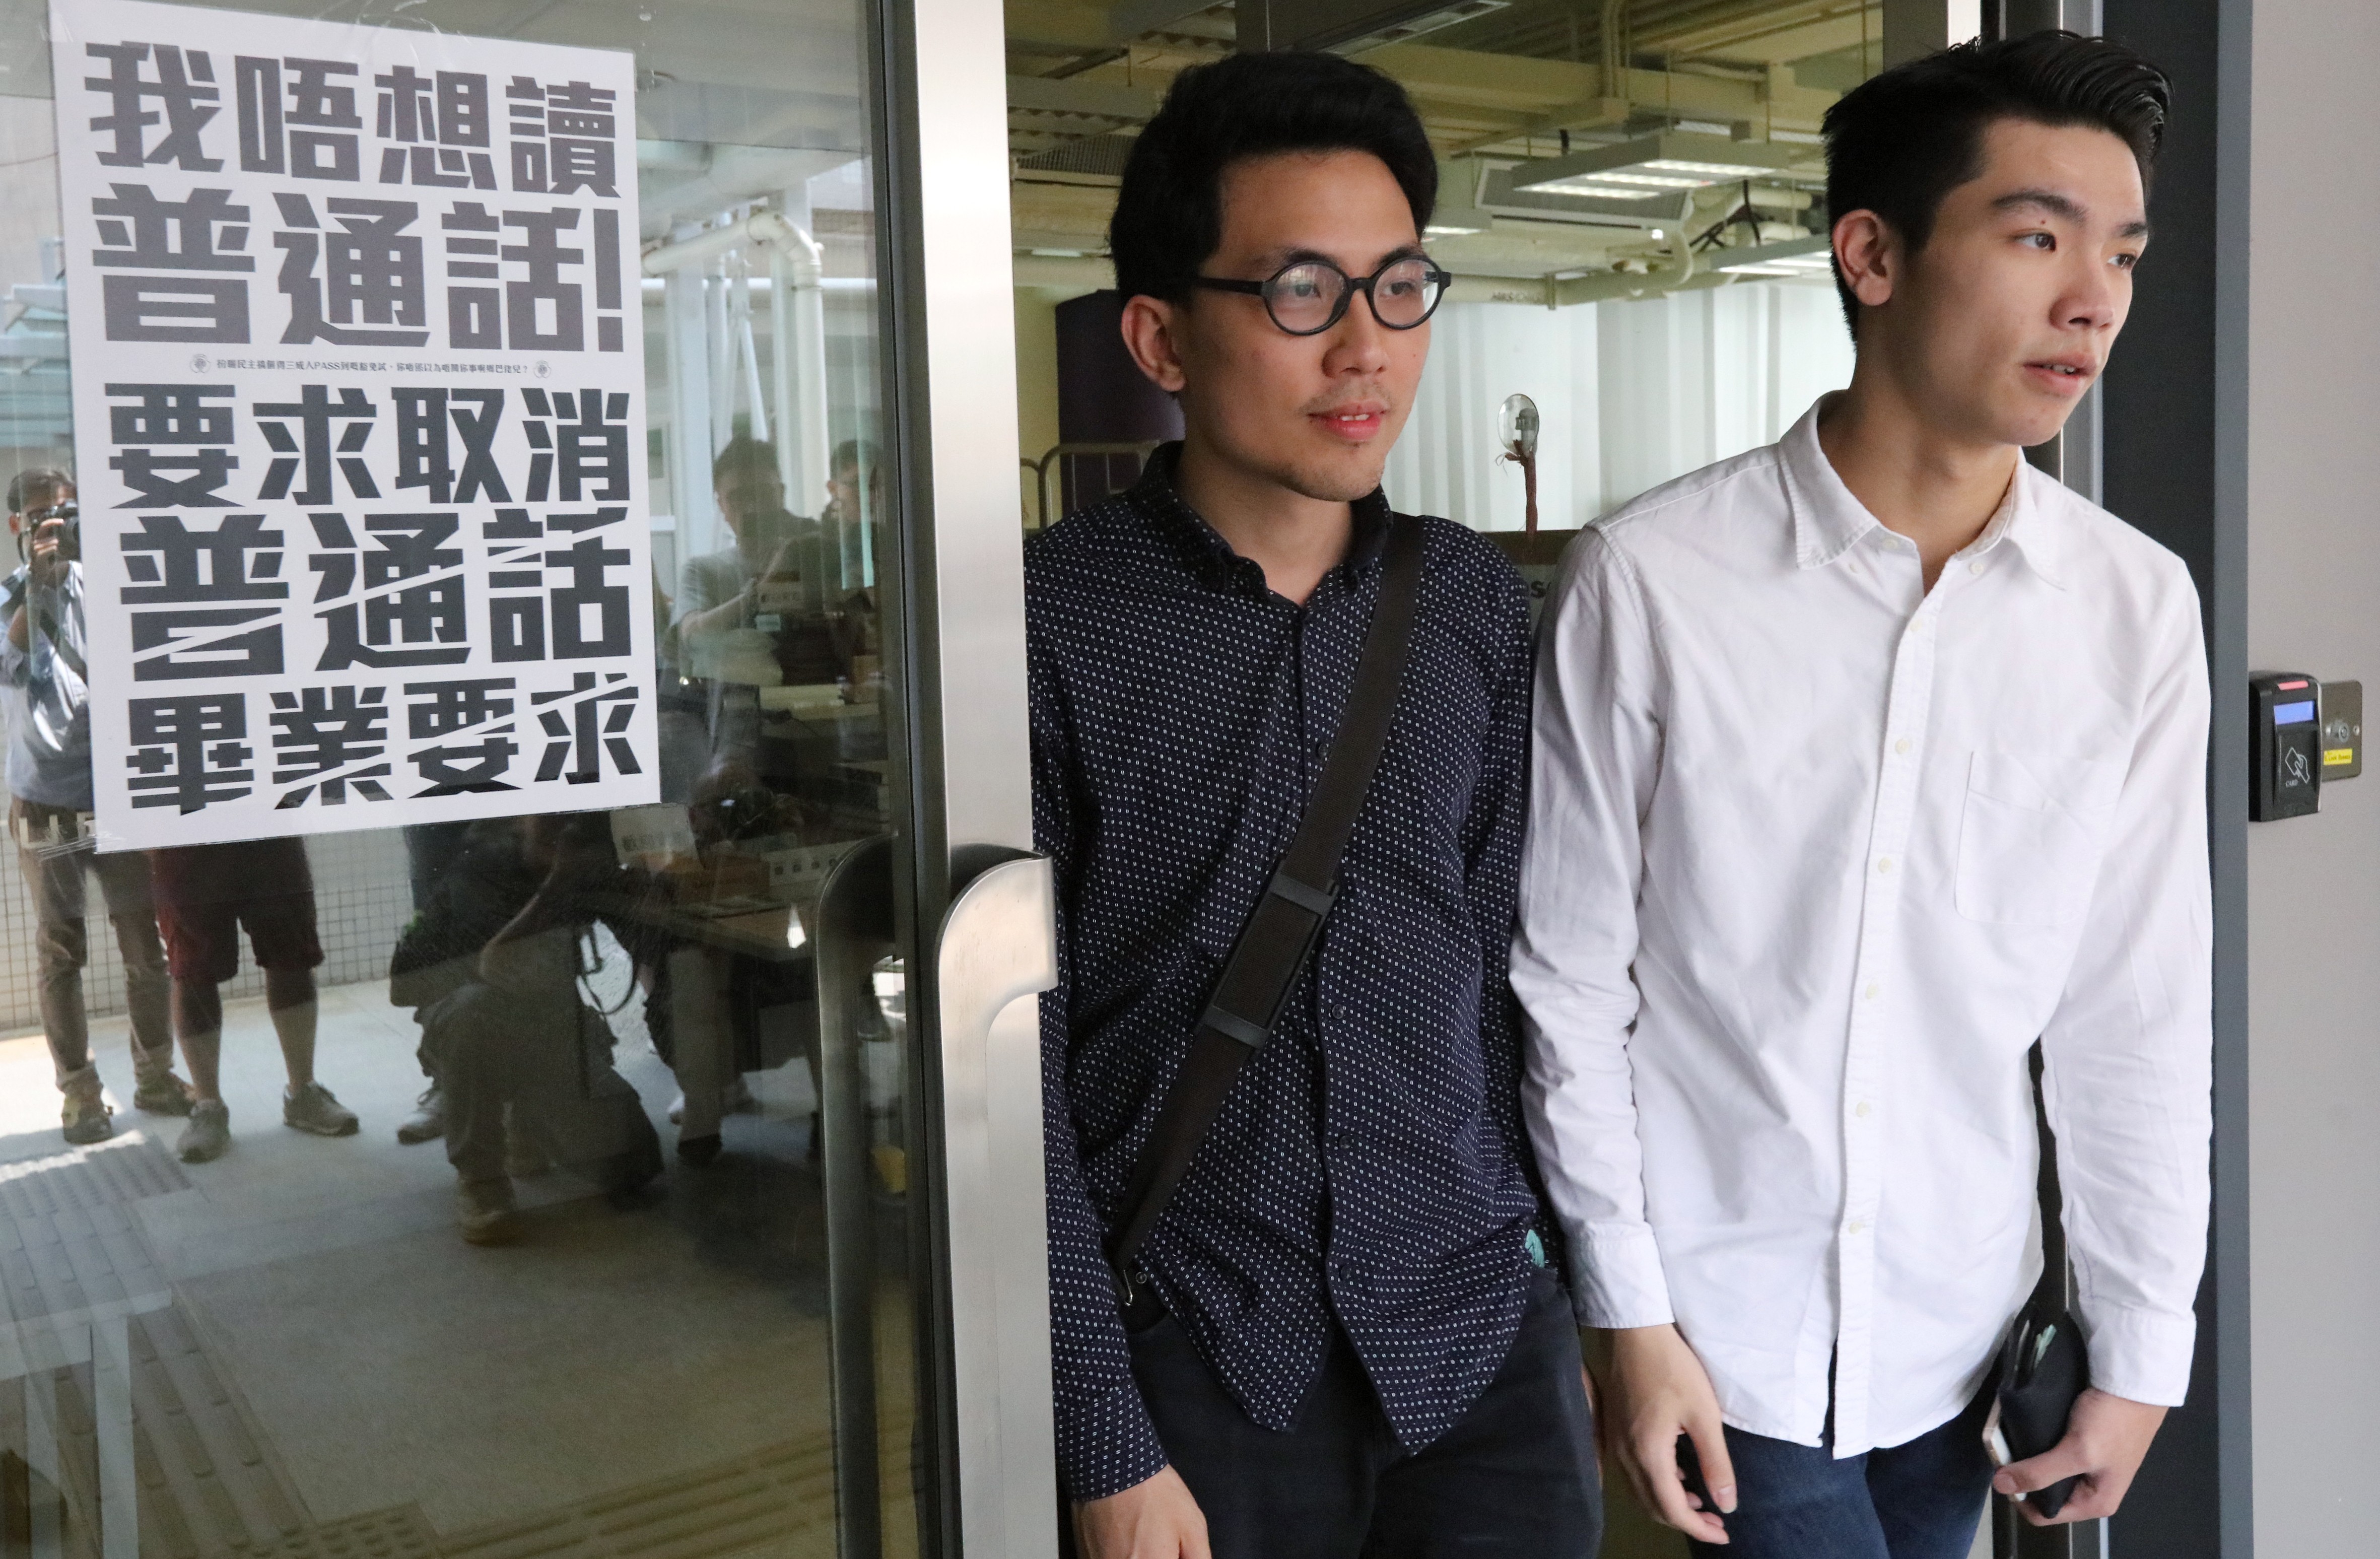 Andrew Chan (left) and Lau Tsz-kei (right) had an earlier suspension lifted after apologising in person to language centre staff. Photo: Felix Wong